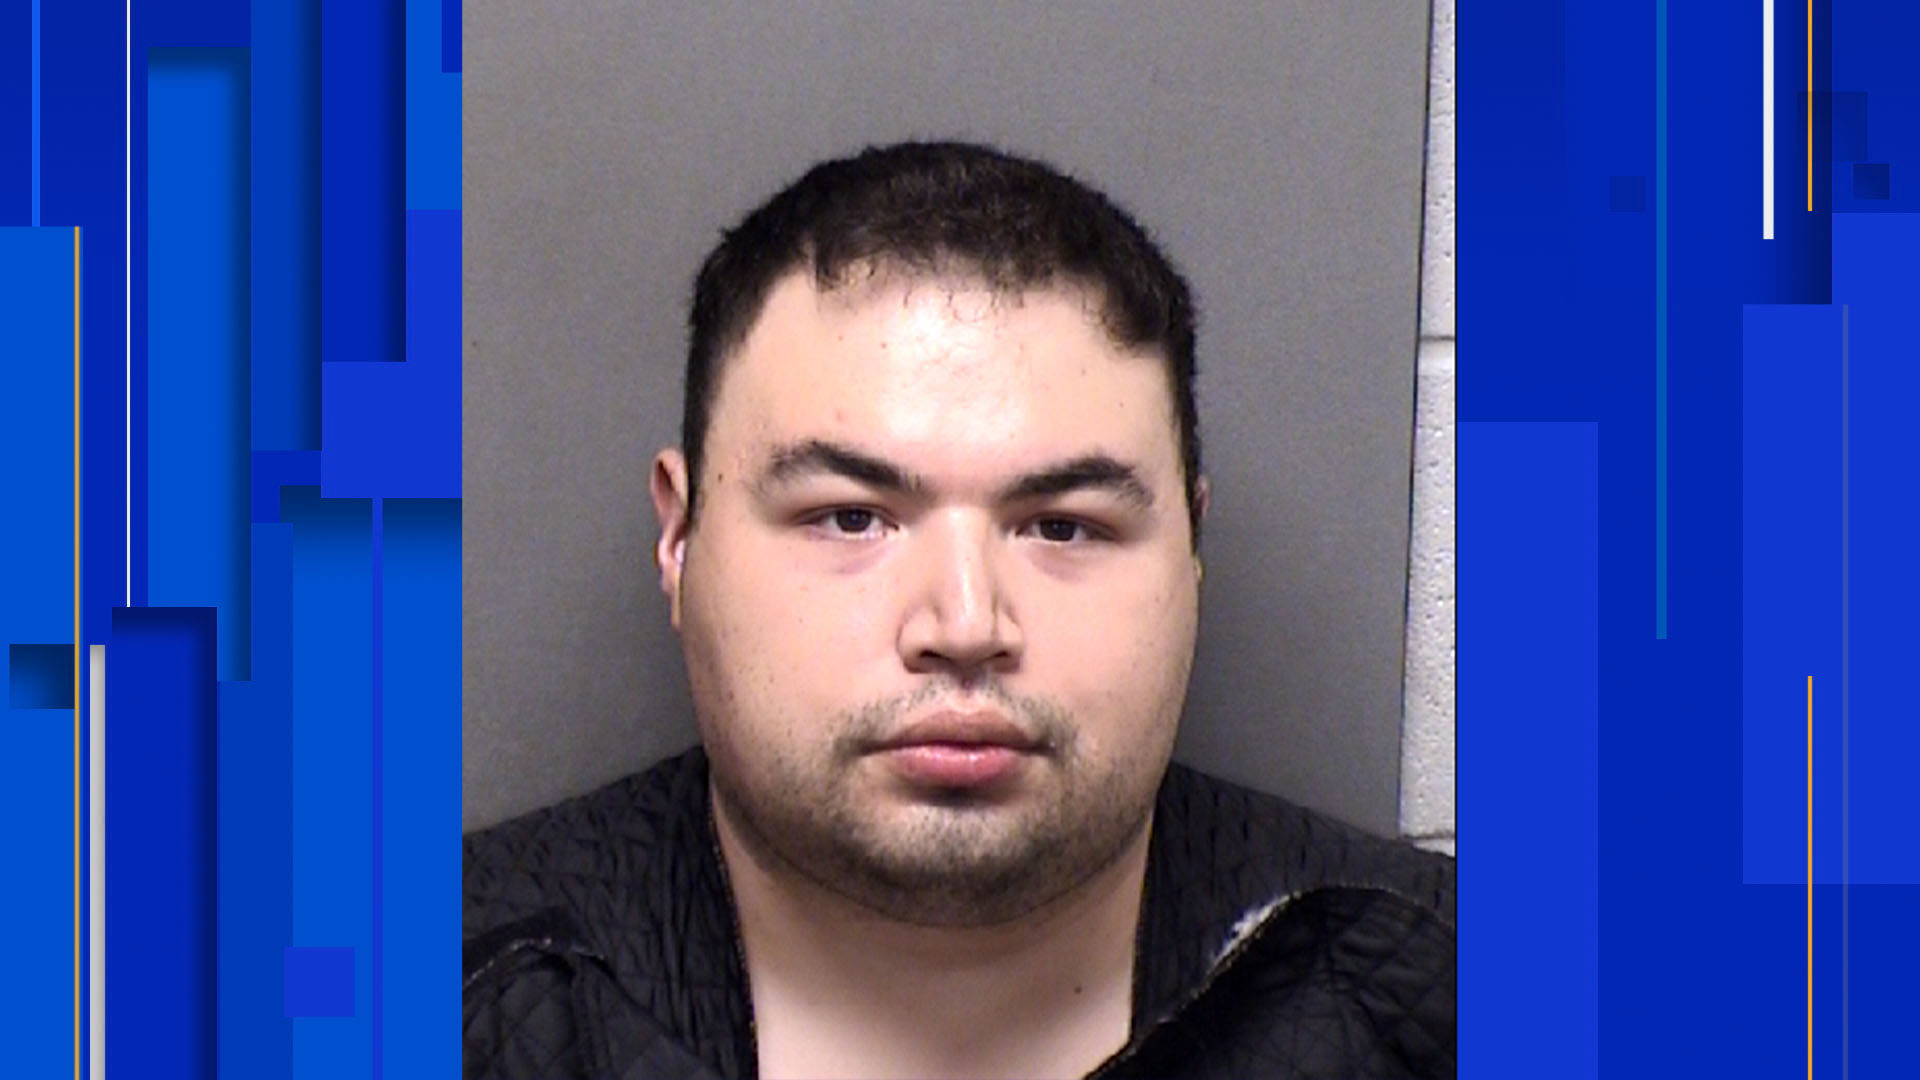 Sxe 12 Sal Com Hd - San Antonio man arrested for having child porn on Dropbox and email,  records show